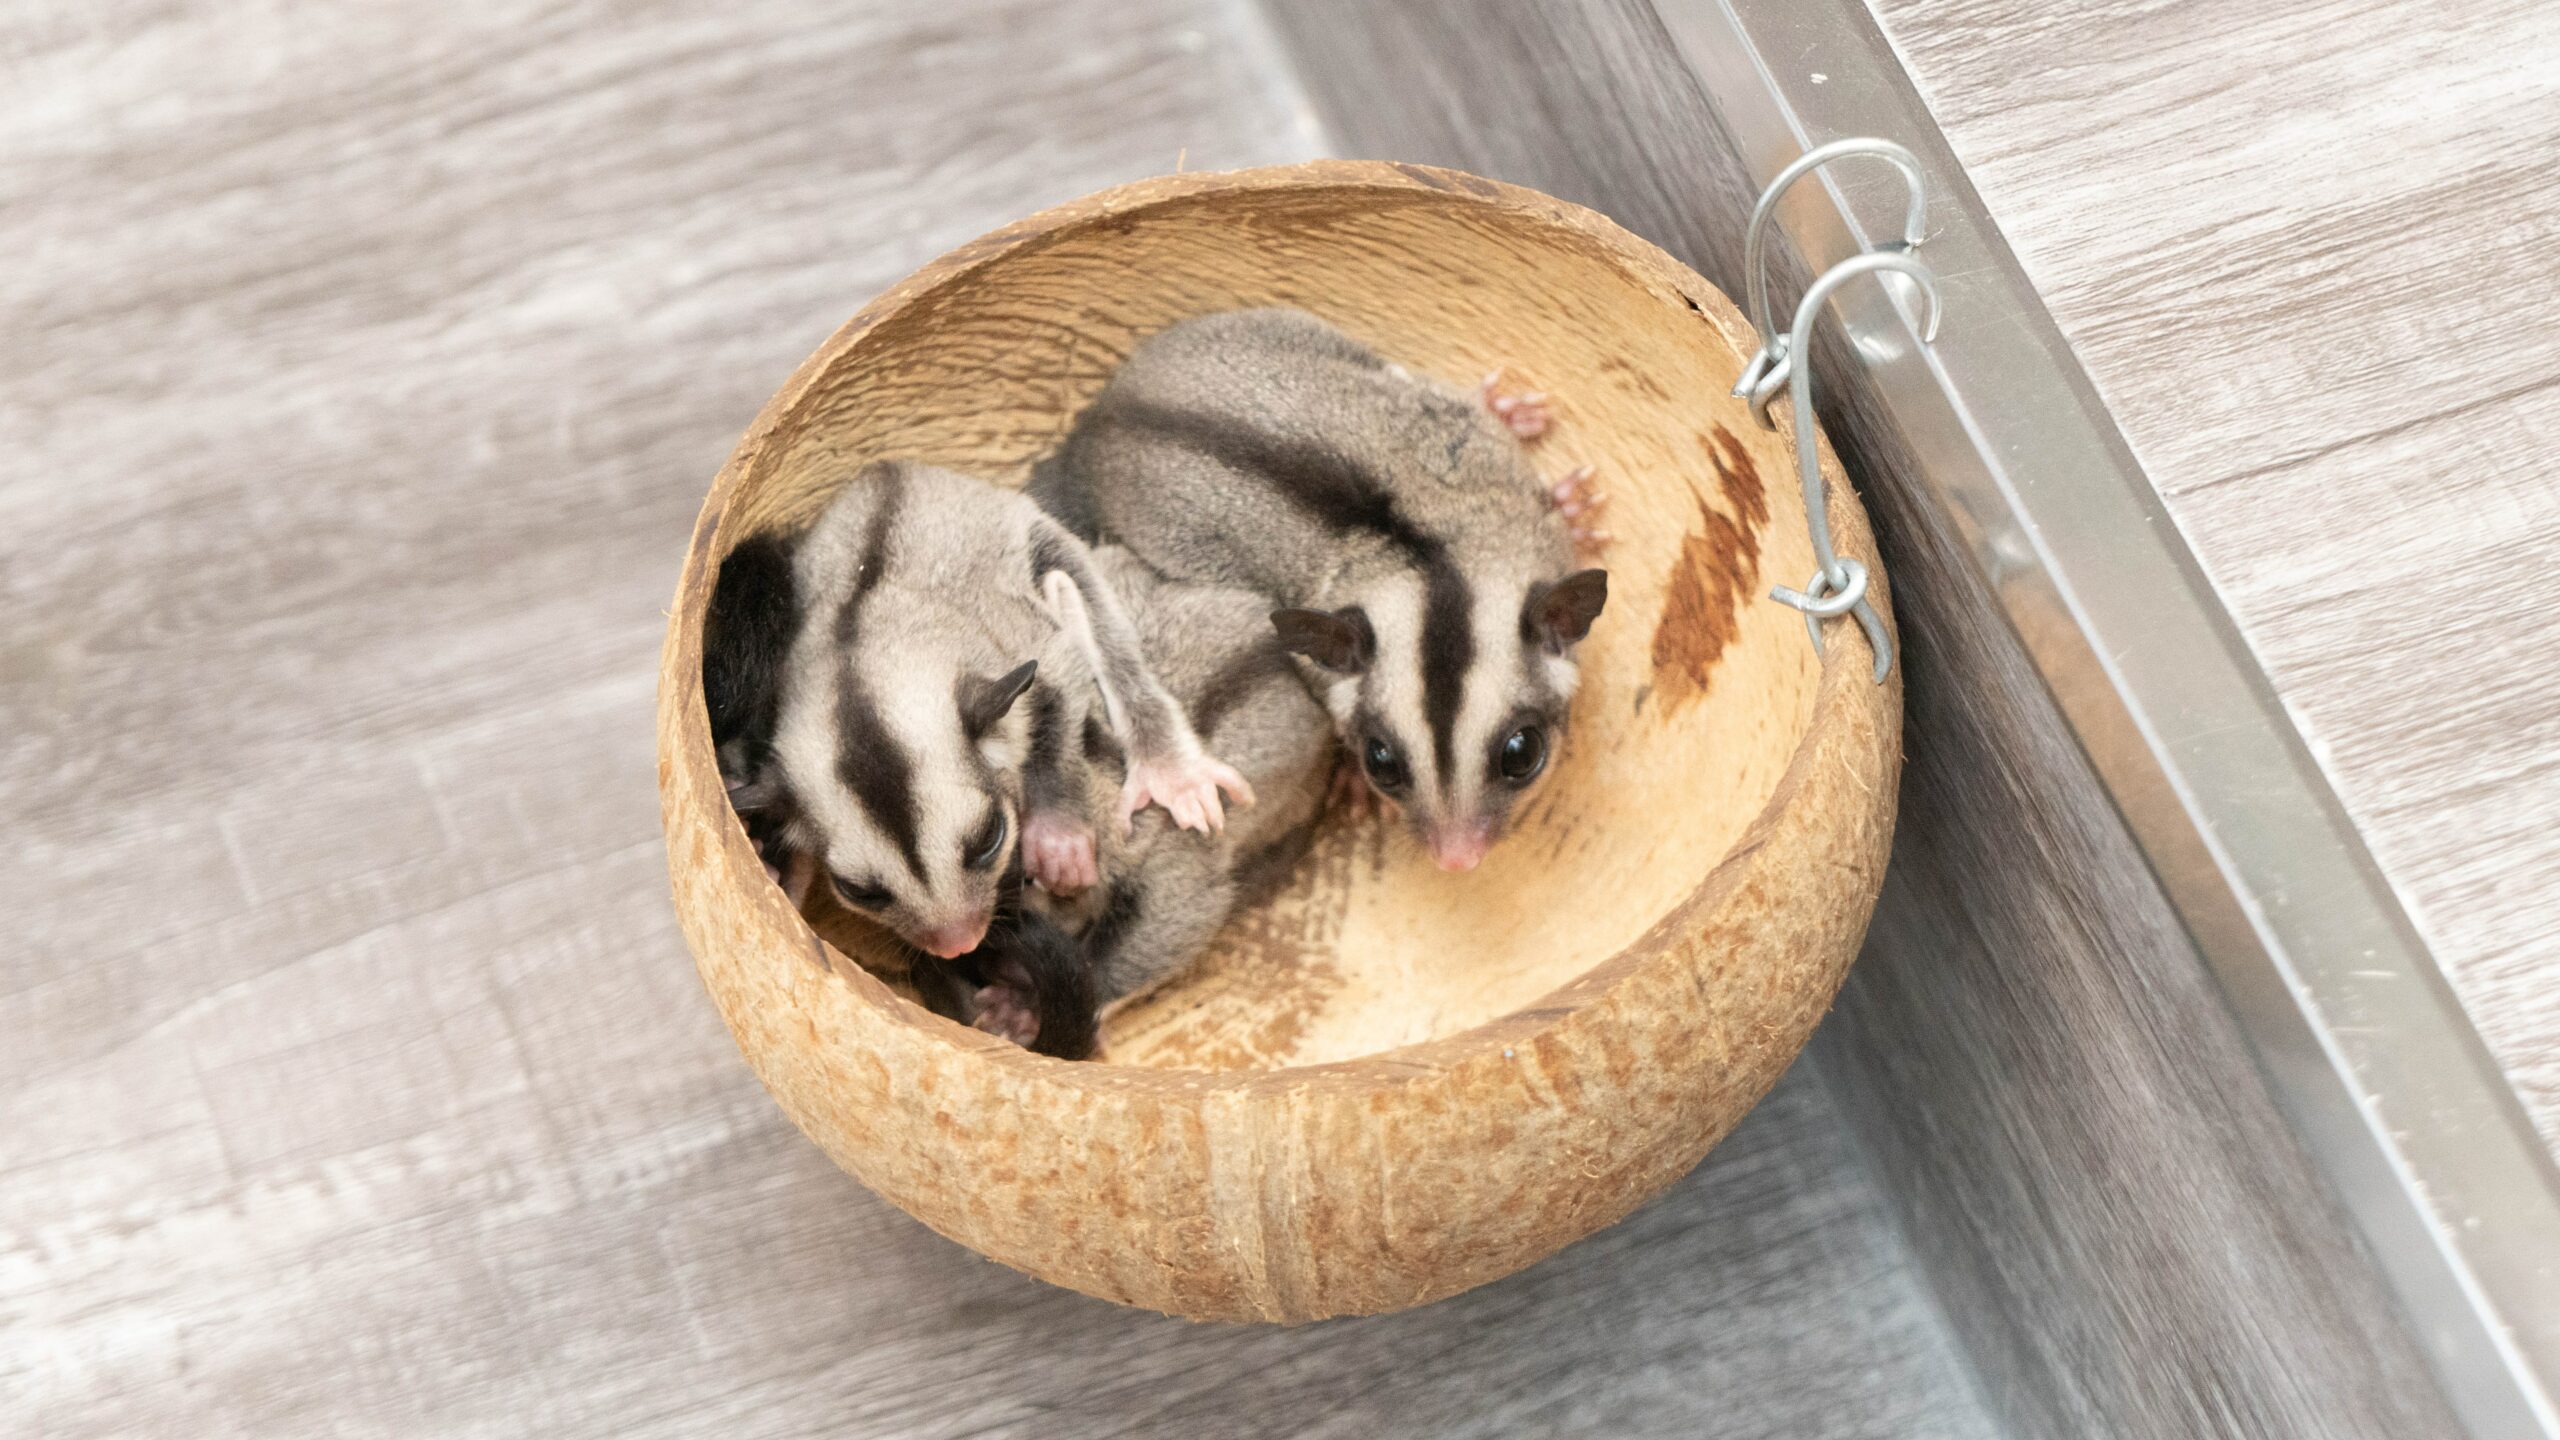 How Do Sugar Gliders Defend Themselves? Clever Strategies for Avoiding Predators